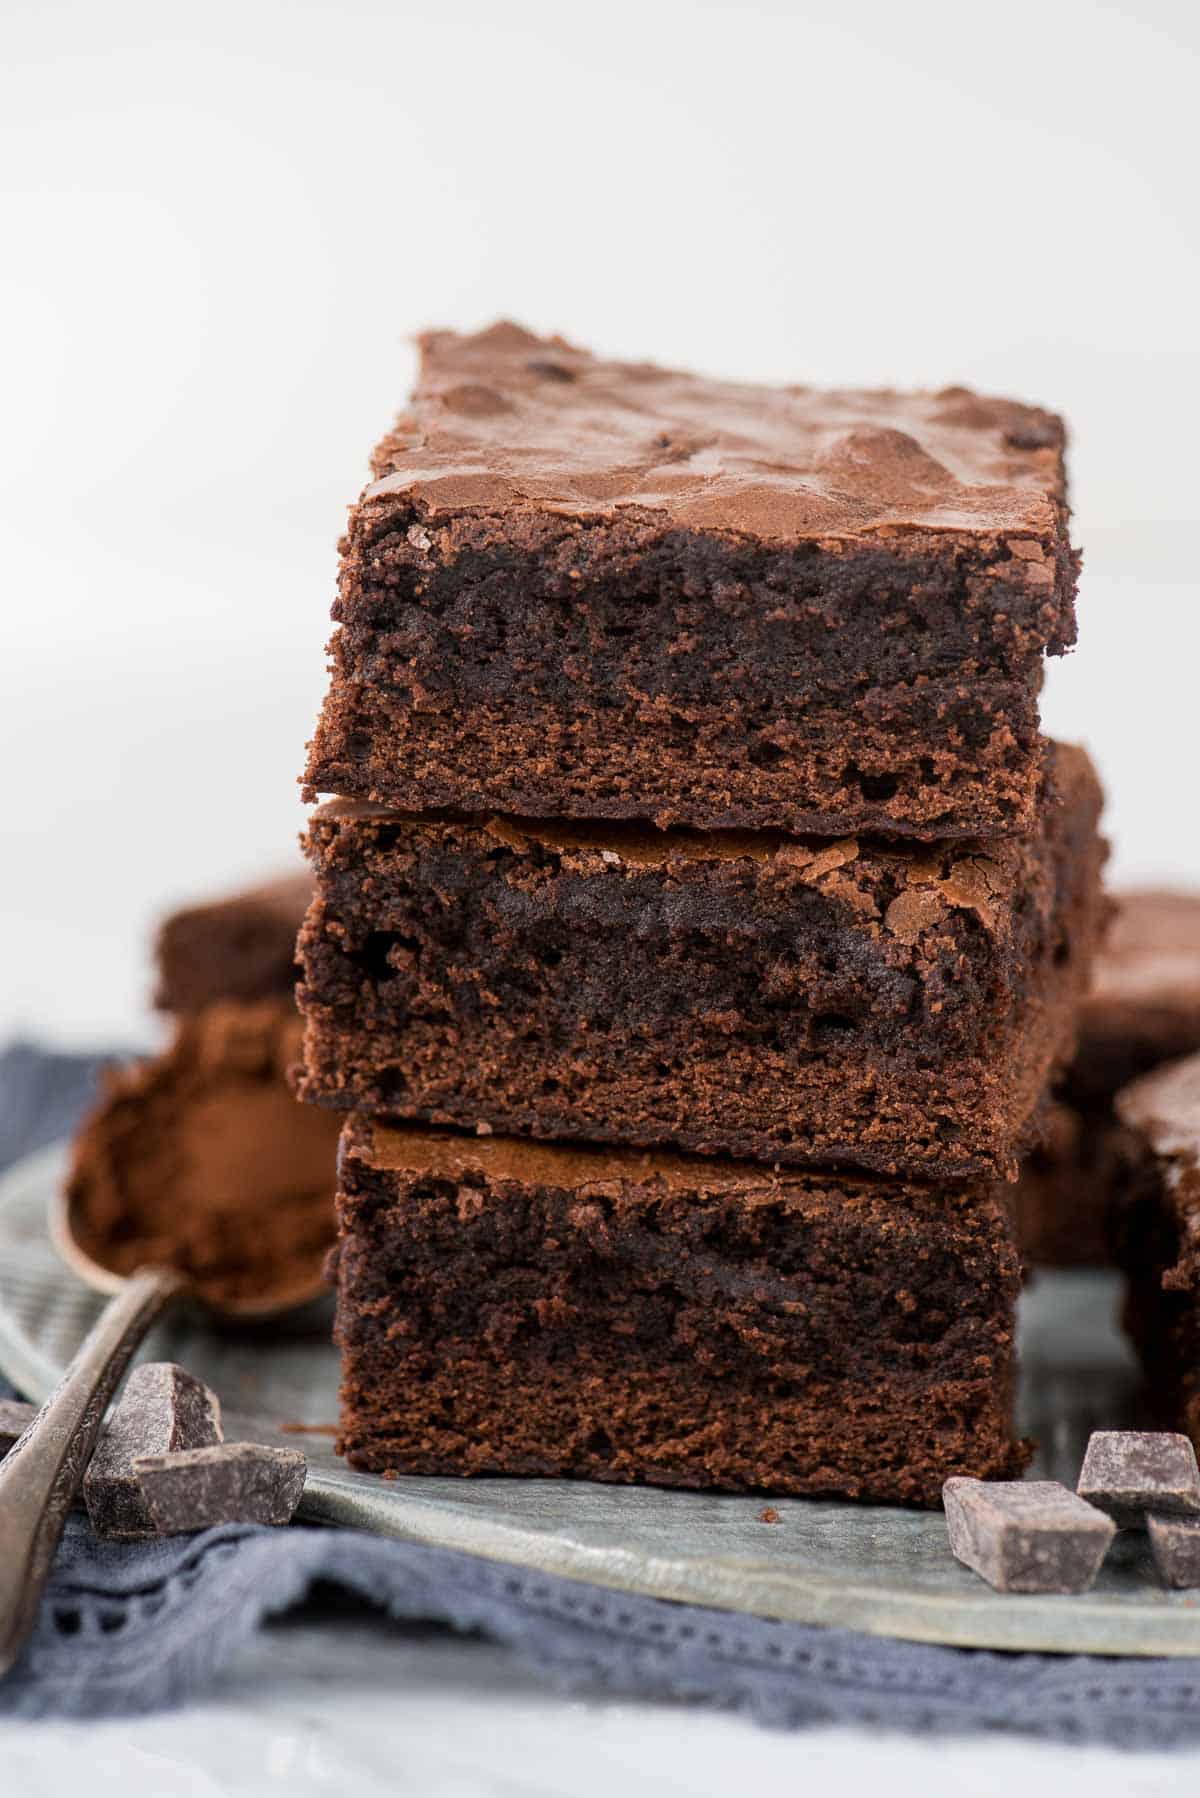 How to make box brownies better